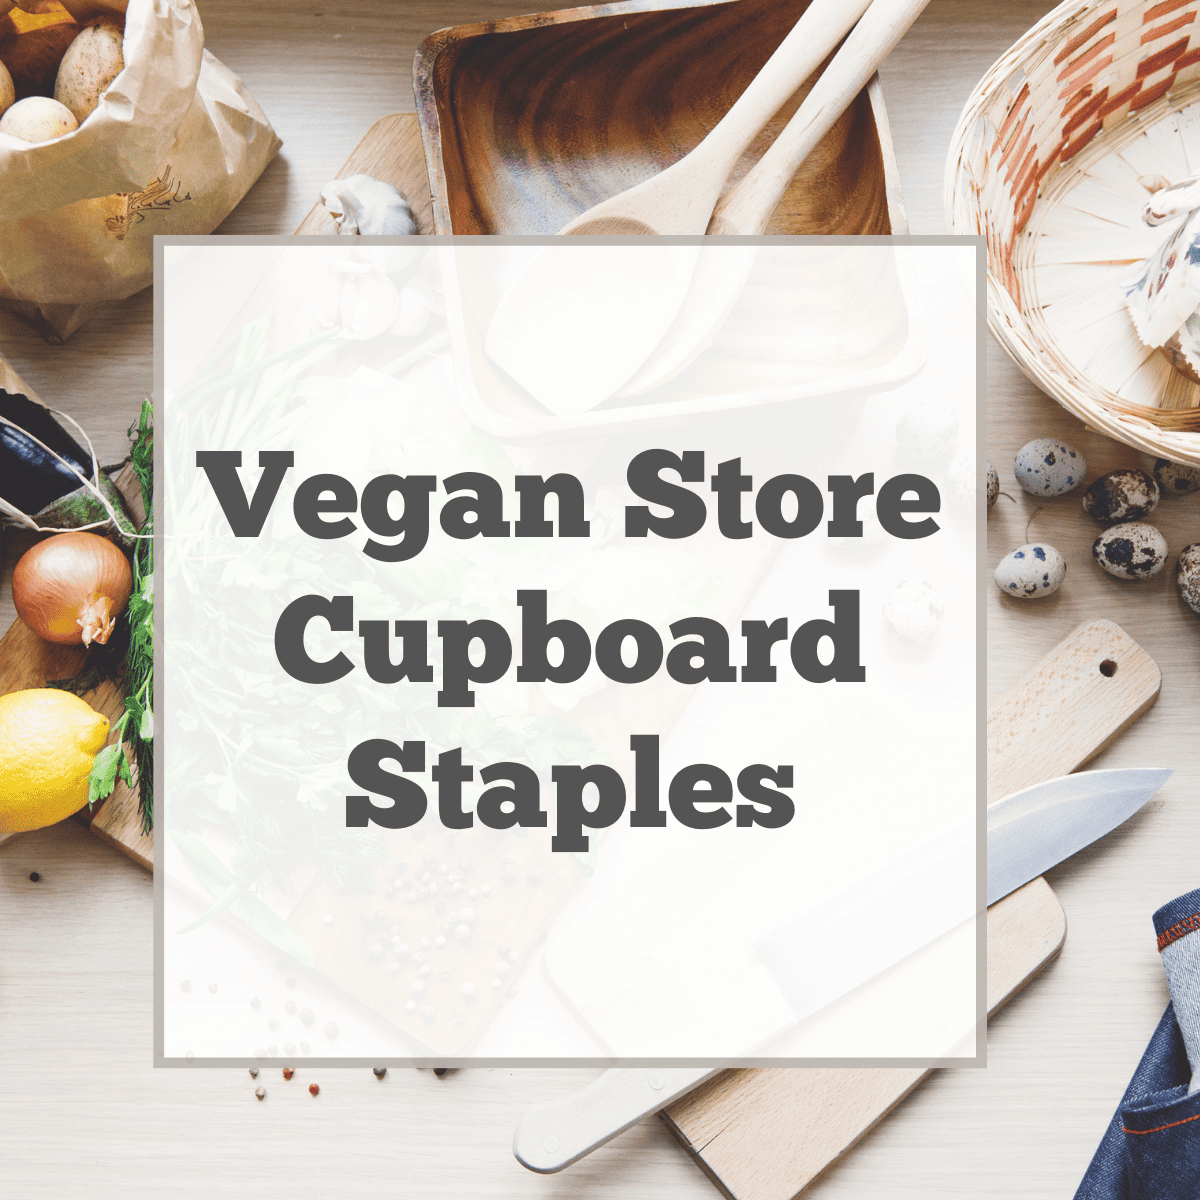 Store cupboard staples featured image.